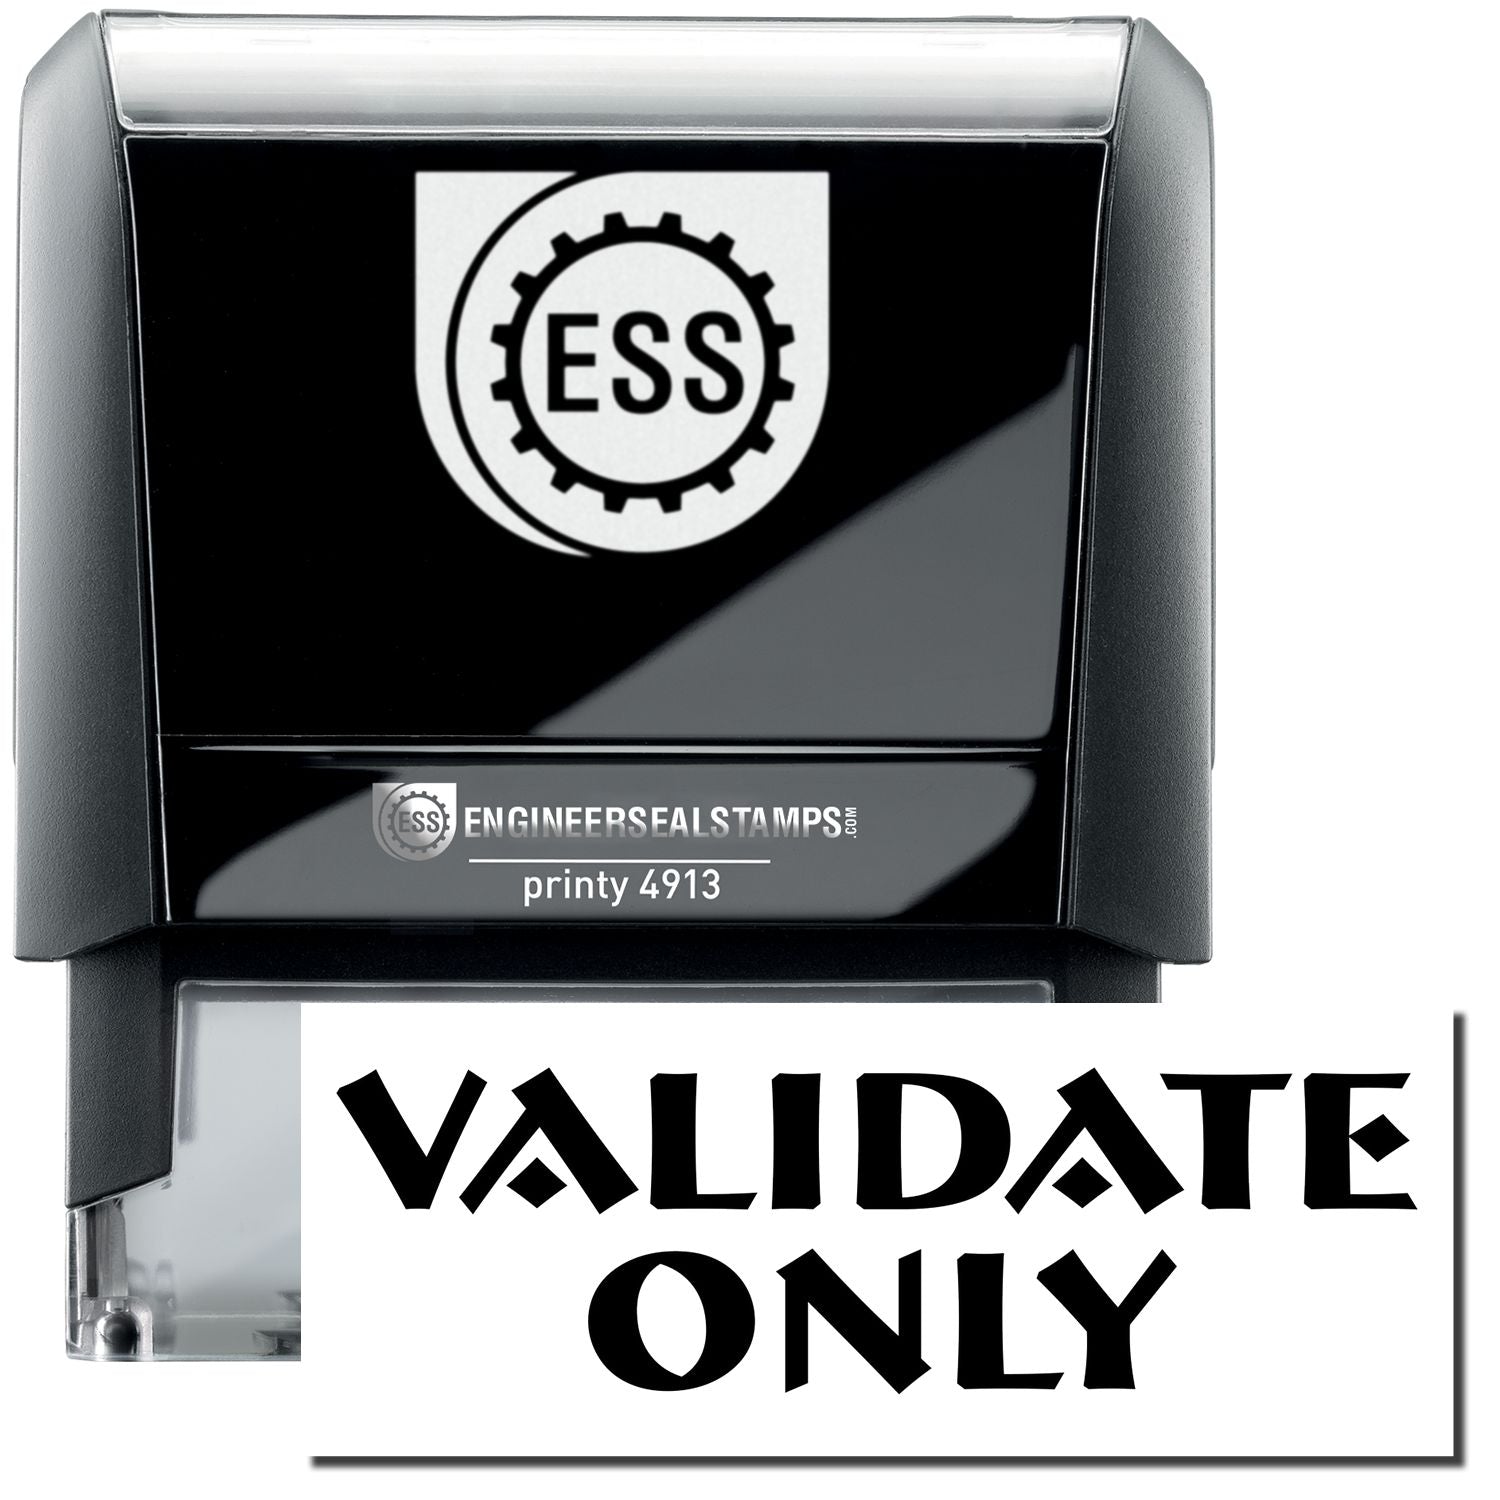 A self-inking stamp with a stamped image showing how the text "VALIDATE ONLY" in a large bold font is displayed by it.